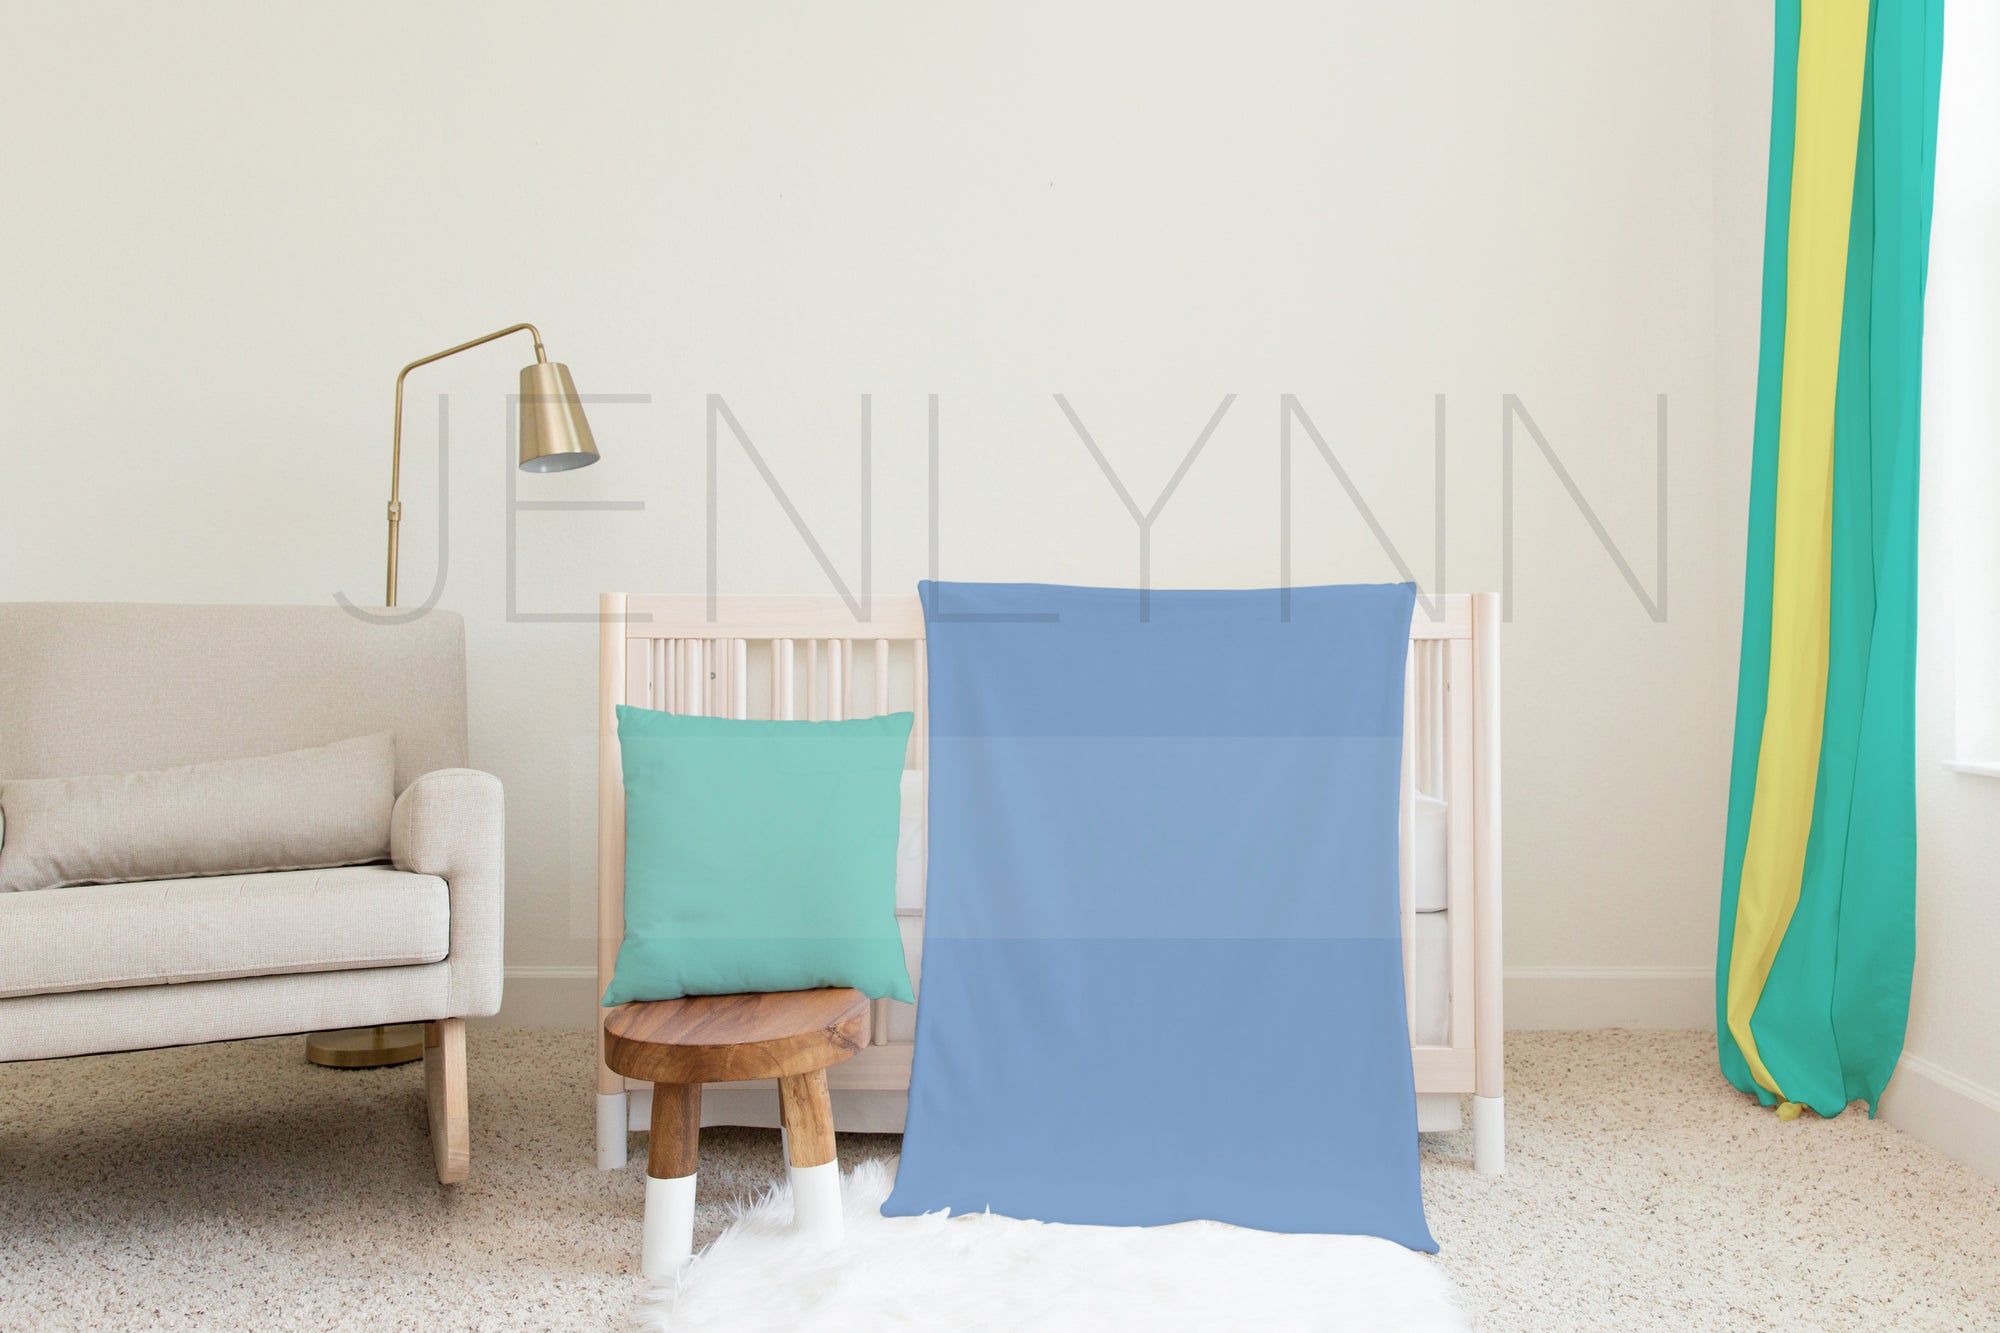 30x40 Vertical Minky Blanket, Pillow and Curtain Mockup #02